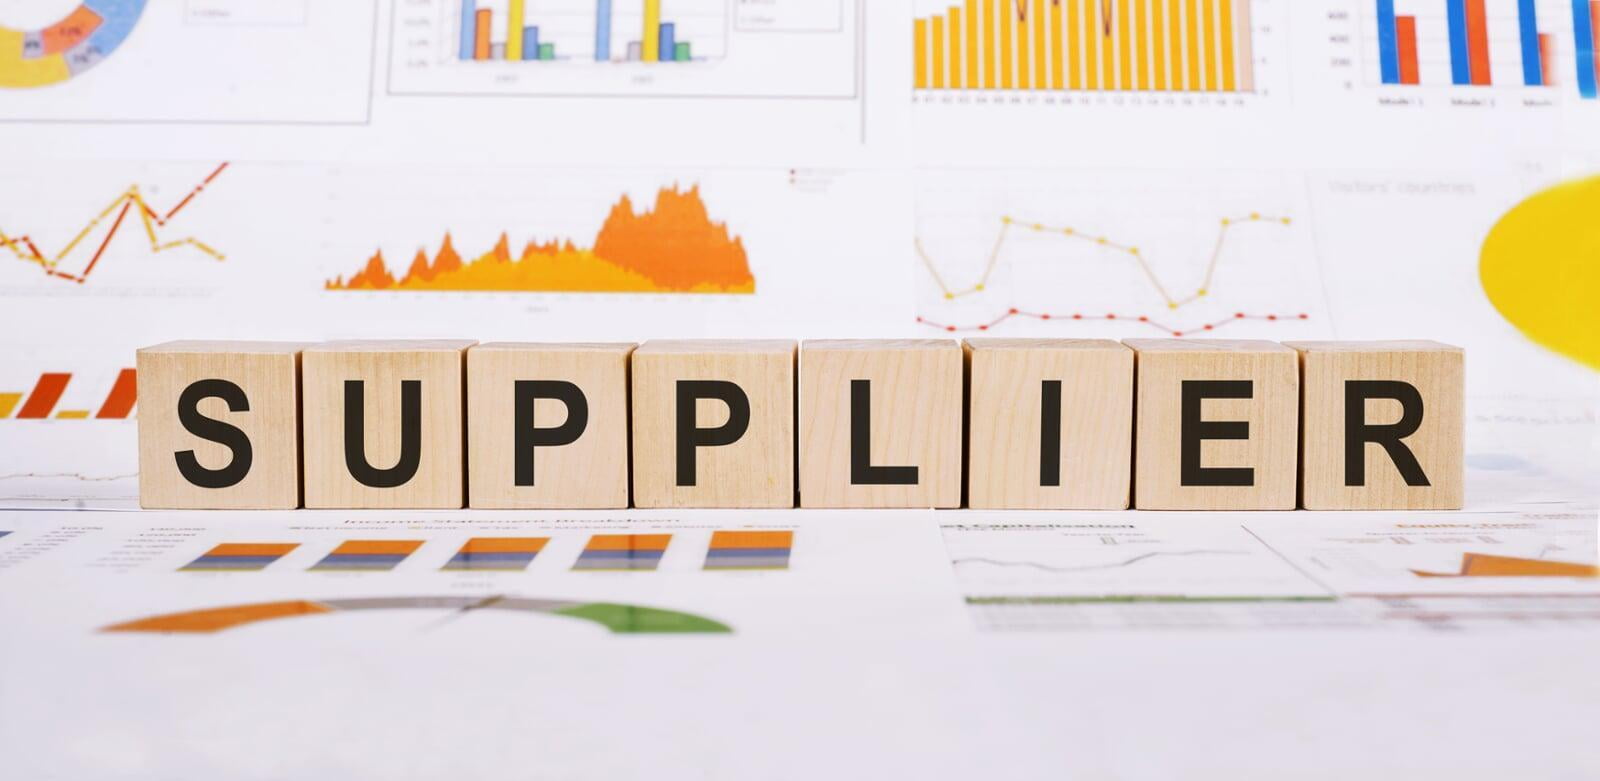 What Are the Essential Things to Remember When Selecting a New Supplier?